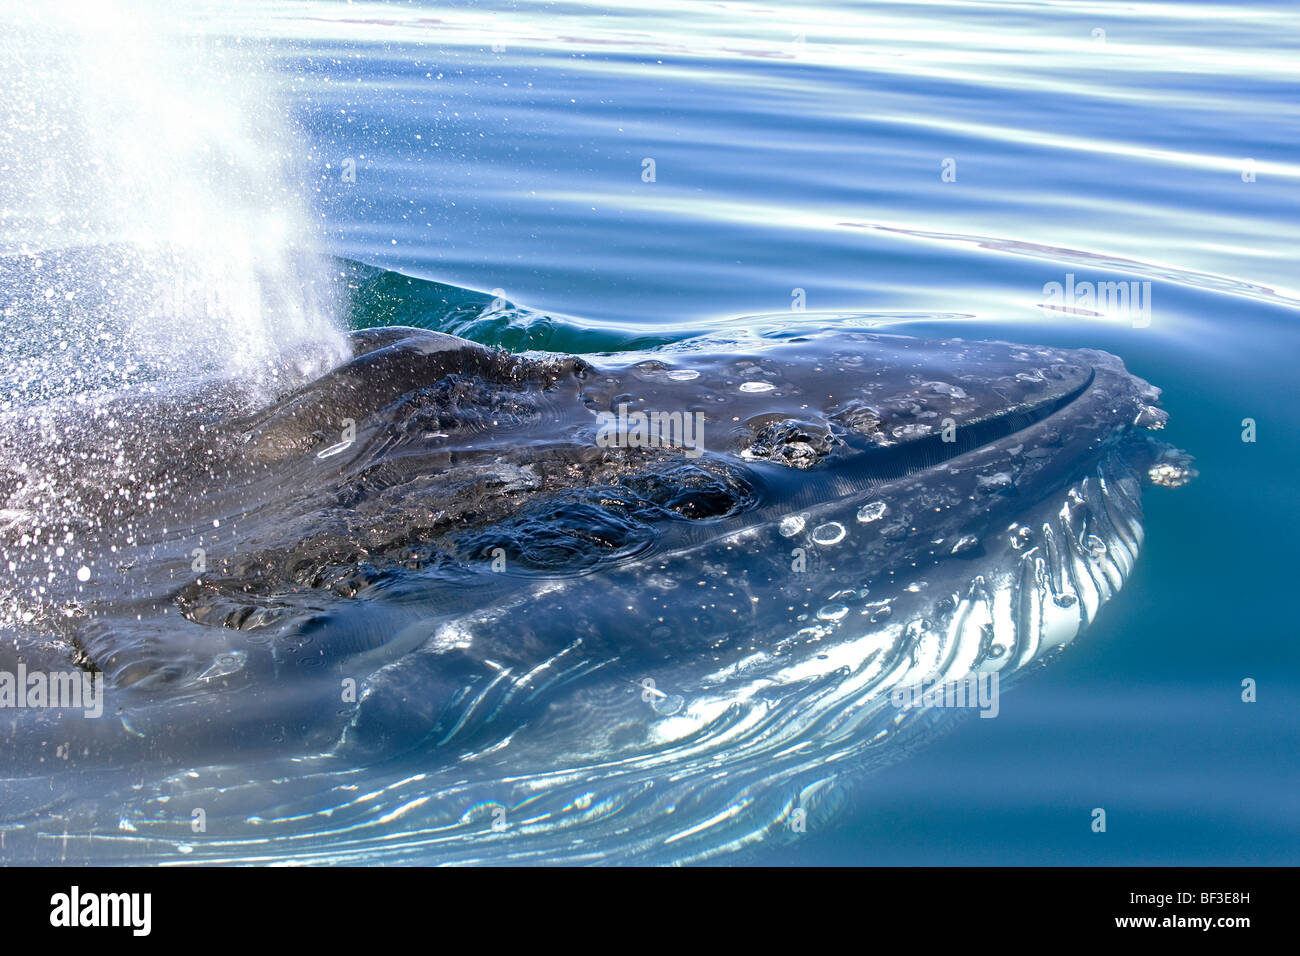 Humpback Whale (Megaptera novaeangliae), blowing at the surface. Stock Photo